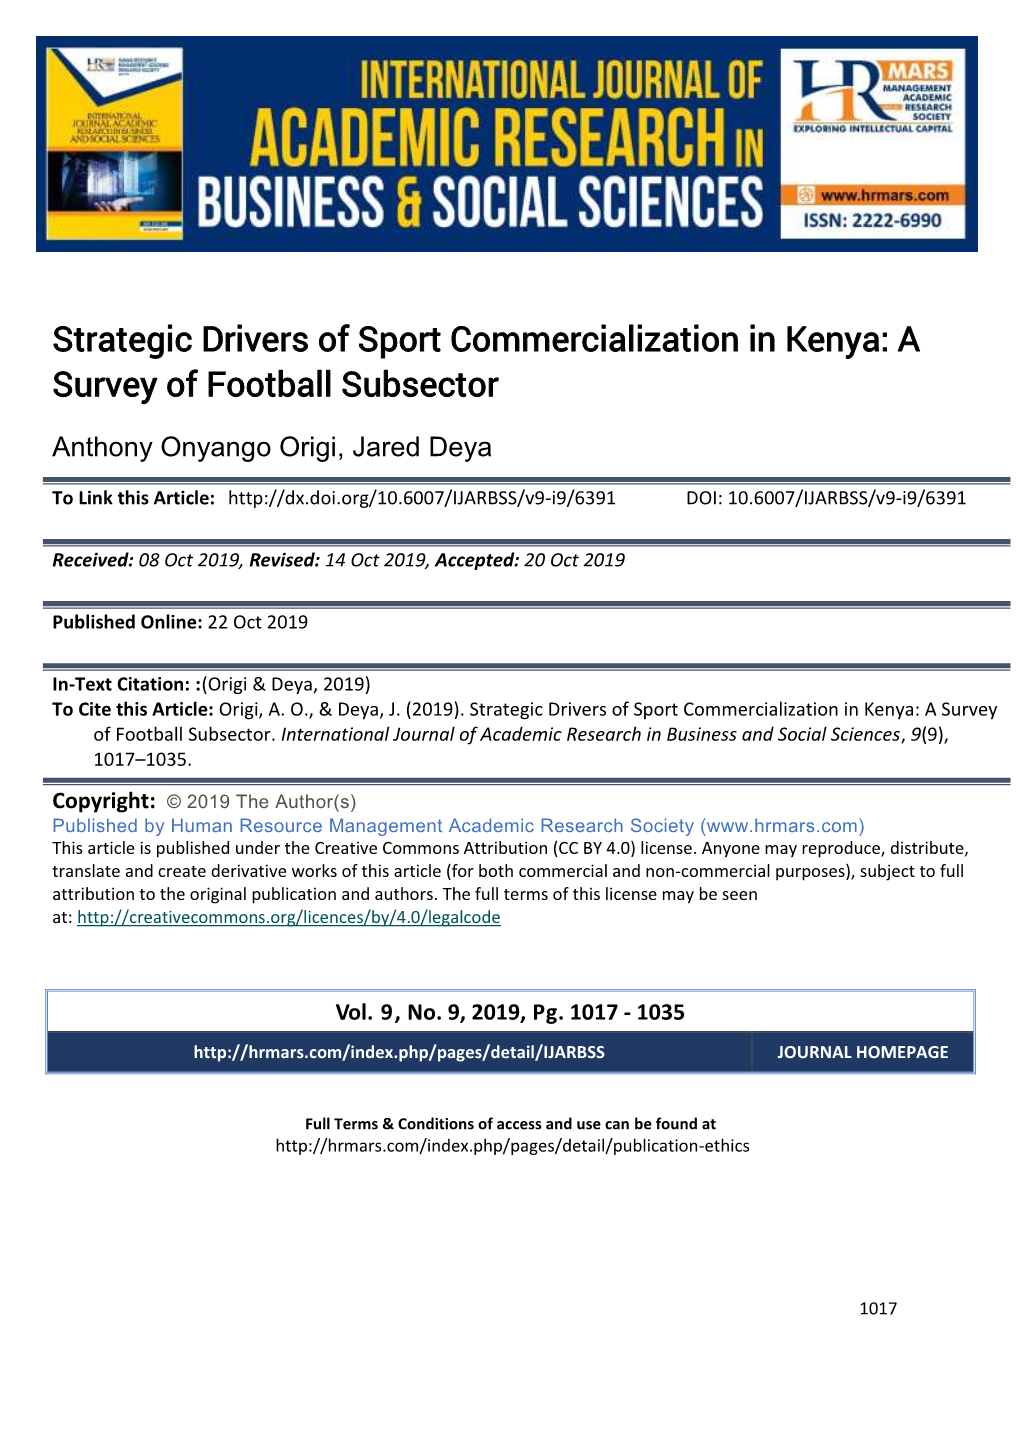 Strategic Drivers of Sport Commercialization in Kenya: a Survey of Football Subsector